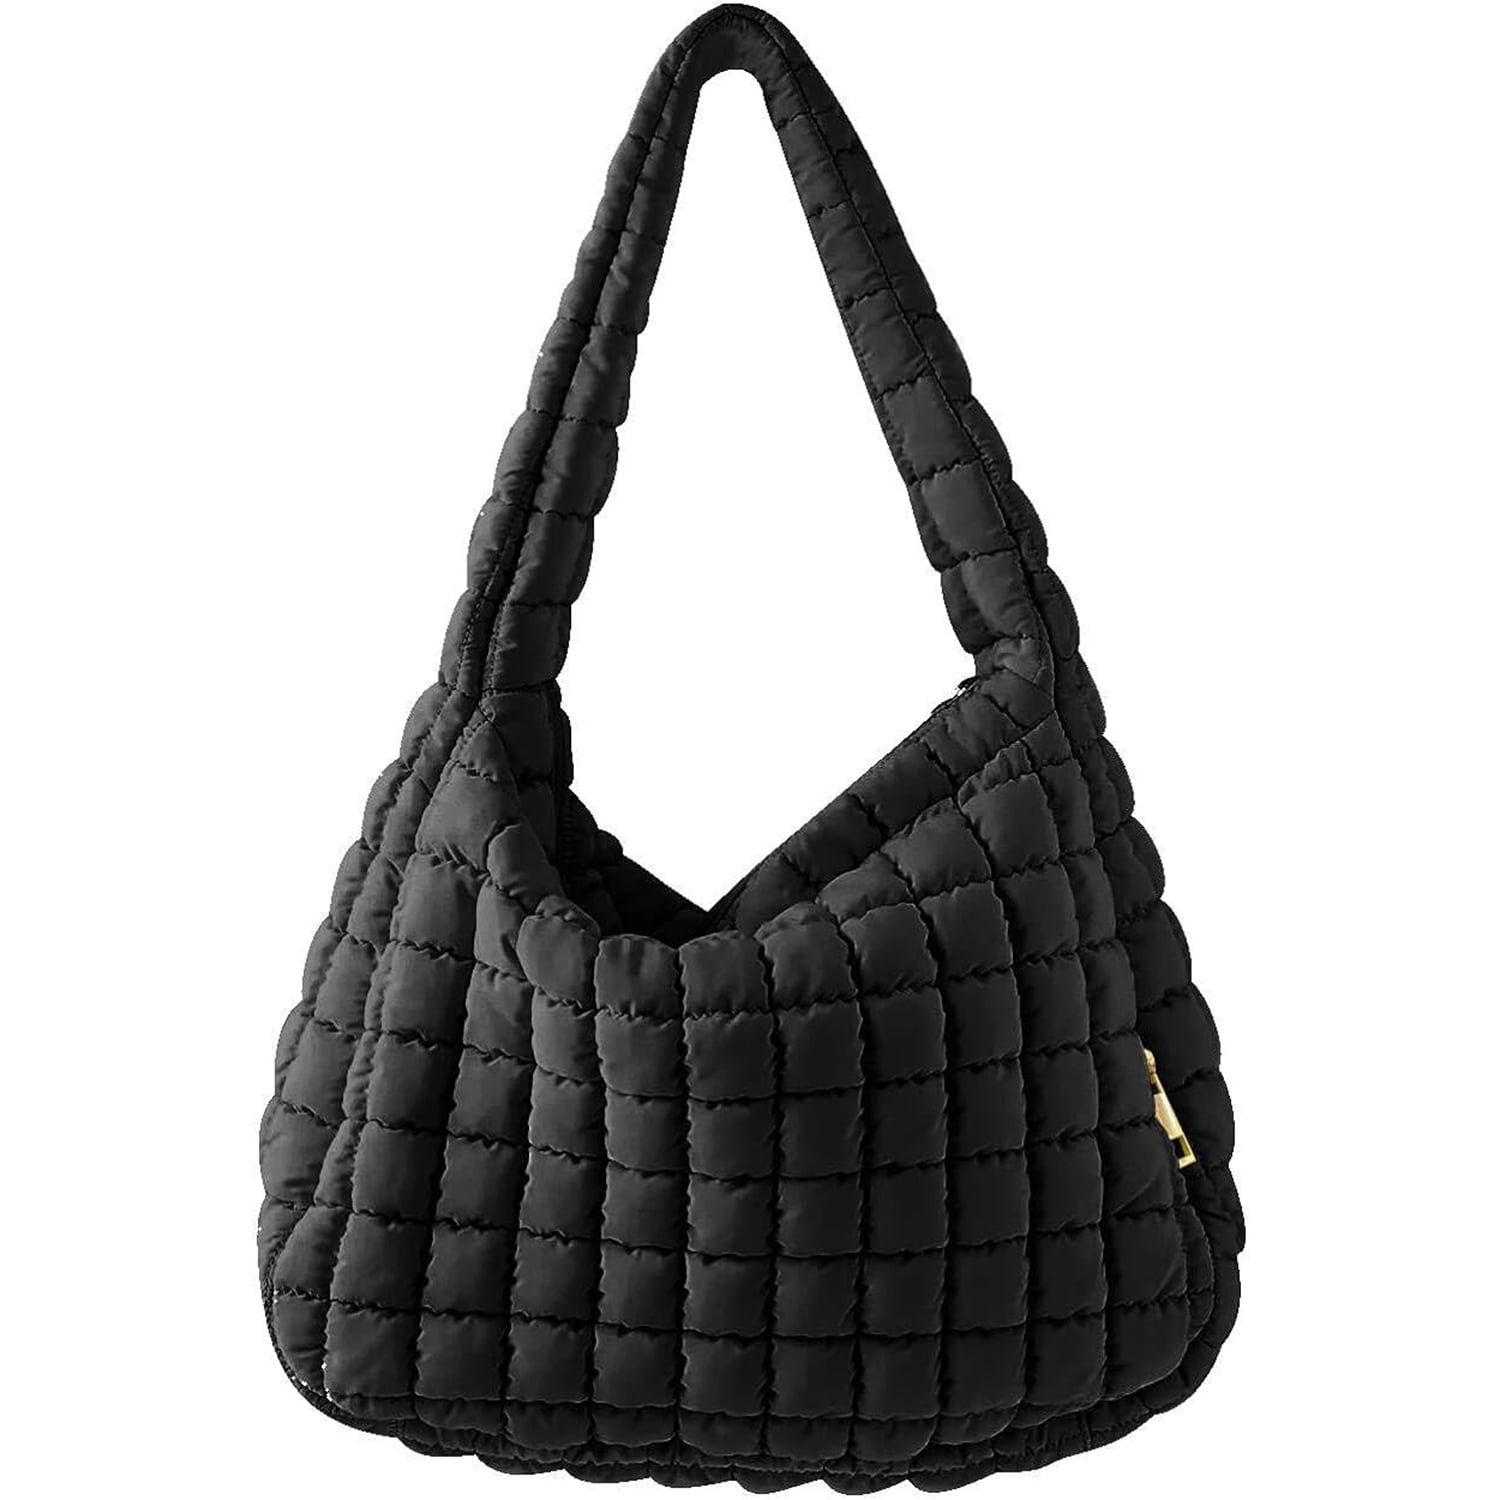 Designer Embossed Tote Bag With Coin Purse High Quality Shopping Bag For  Women With Large Capacity Shoulder And Crossbody Bag With Interchangeable  Straps From Designer_bags666, $38.99 | DHgate.Com